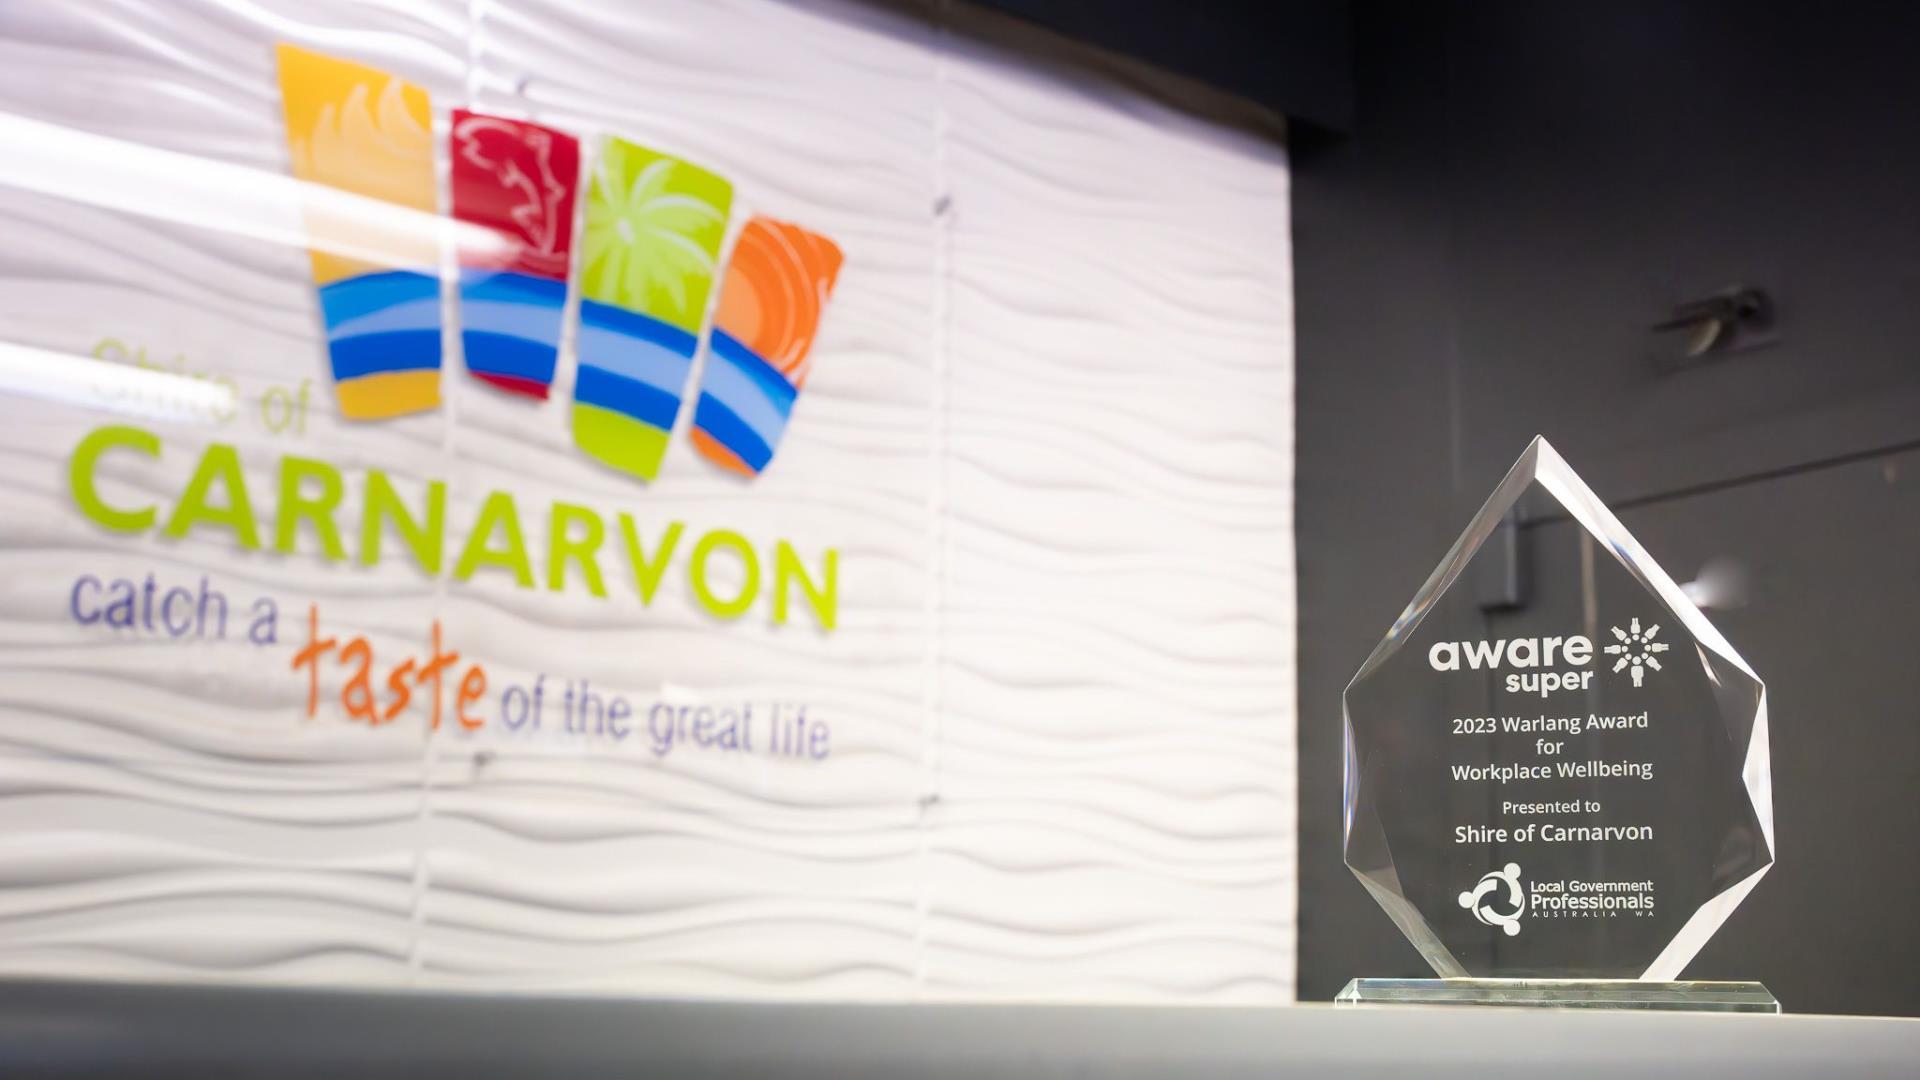 Shire of Carnarvon Celebrates Victory in Aware Super Warlang Award for